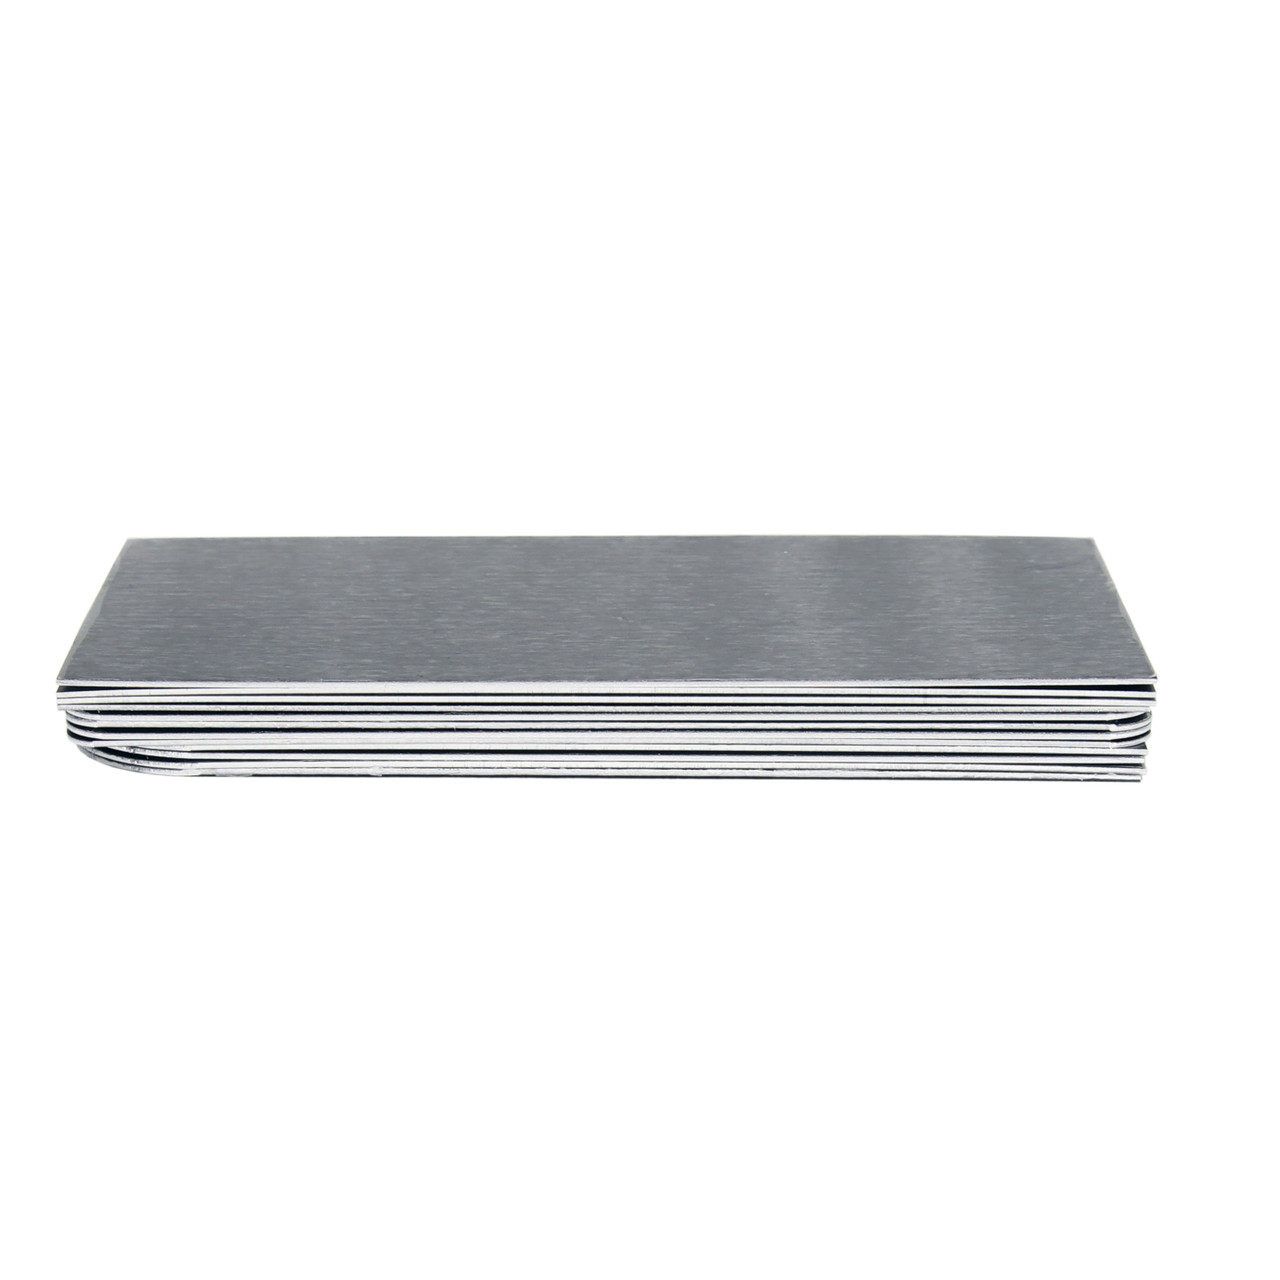  Tandefio 1000 Pcs Metal Business Card Blanks Bulk Multicolor  Aluminum Sheet Business Card 3.38 x 2.12 Aluminum Business Cards blanks for  Customize Card Office Name Card Laser Engraving CNC : Office Products